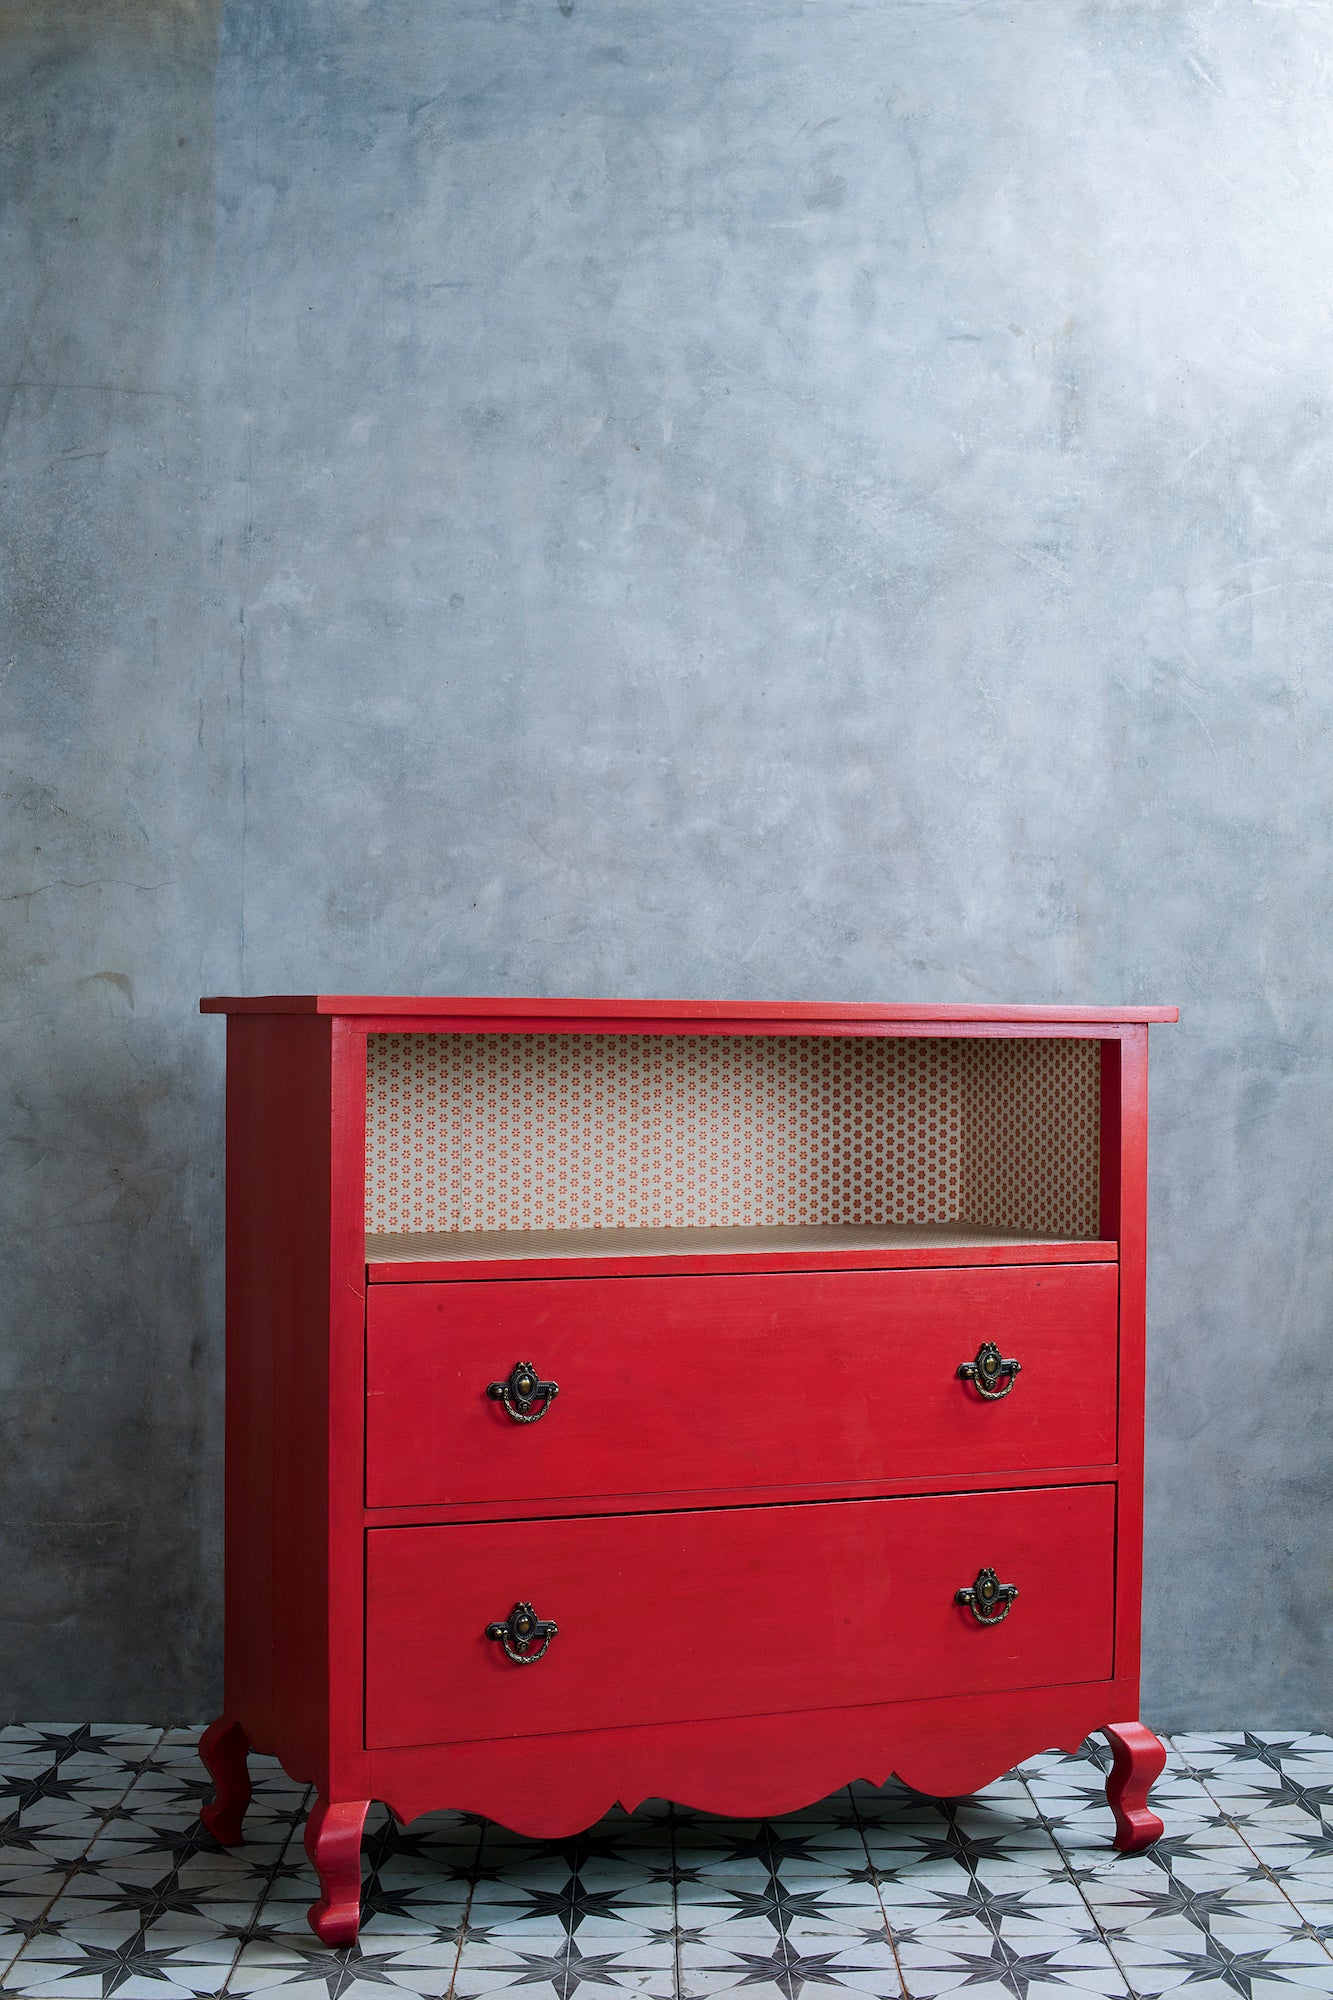 The Calcutta Chest of Drawers